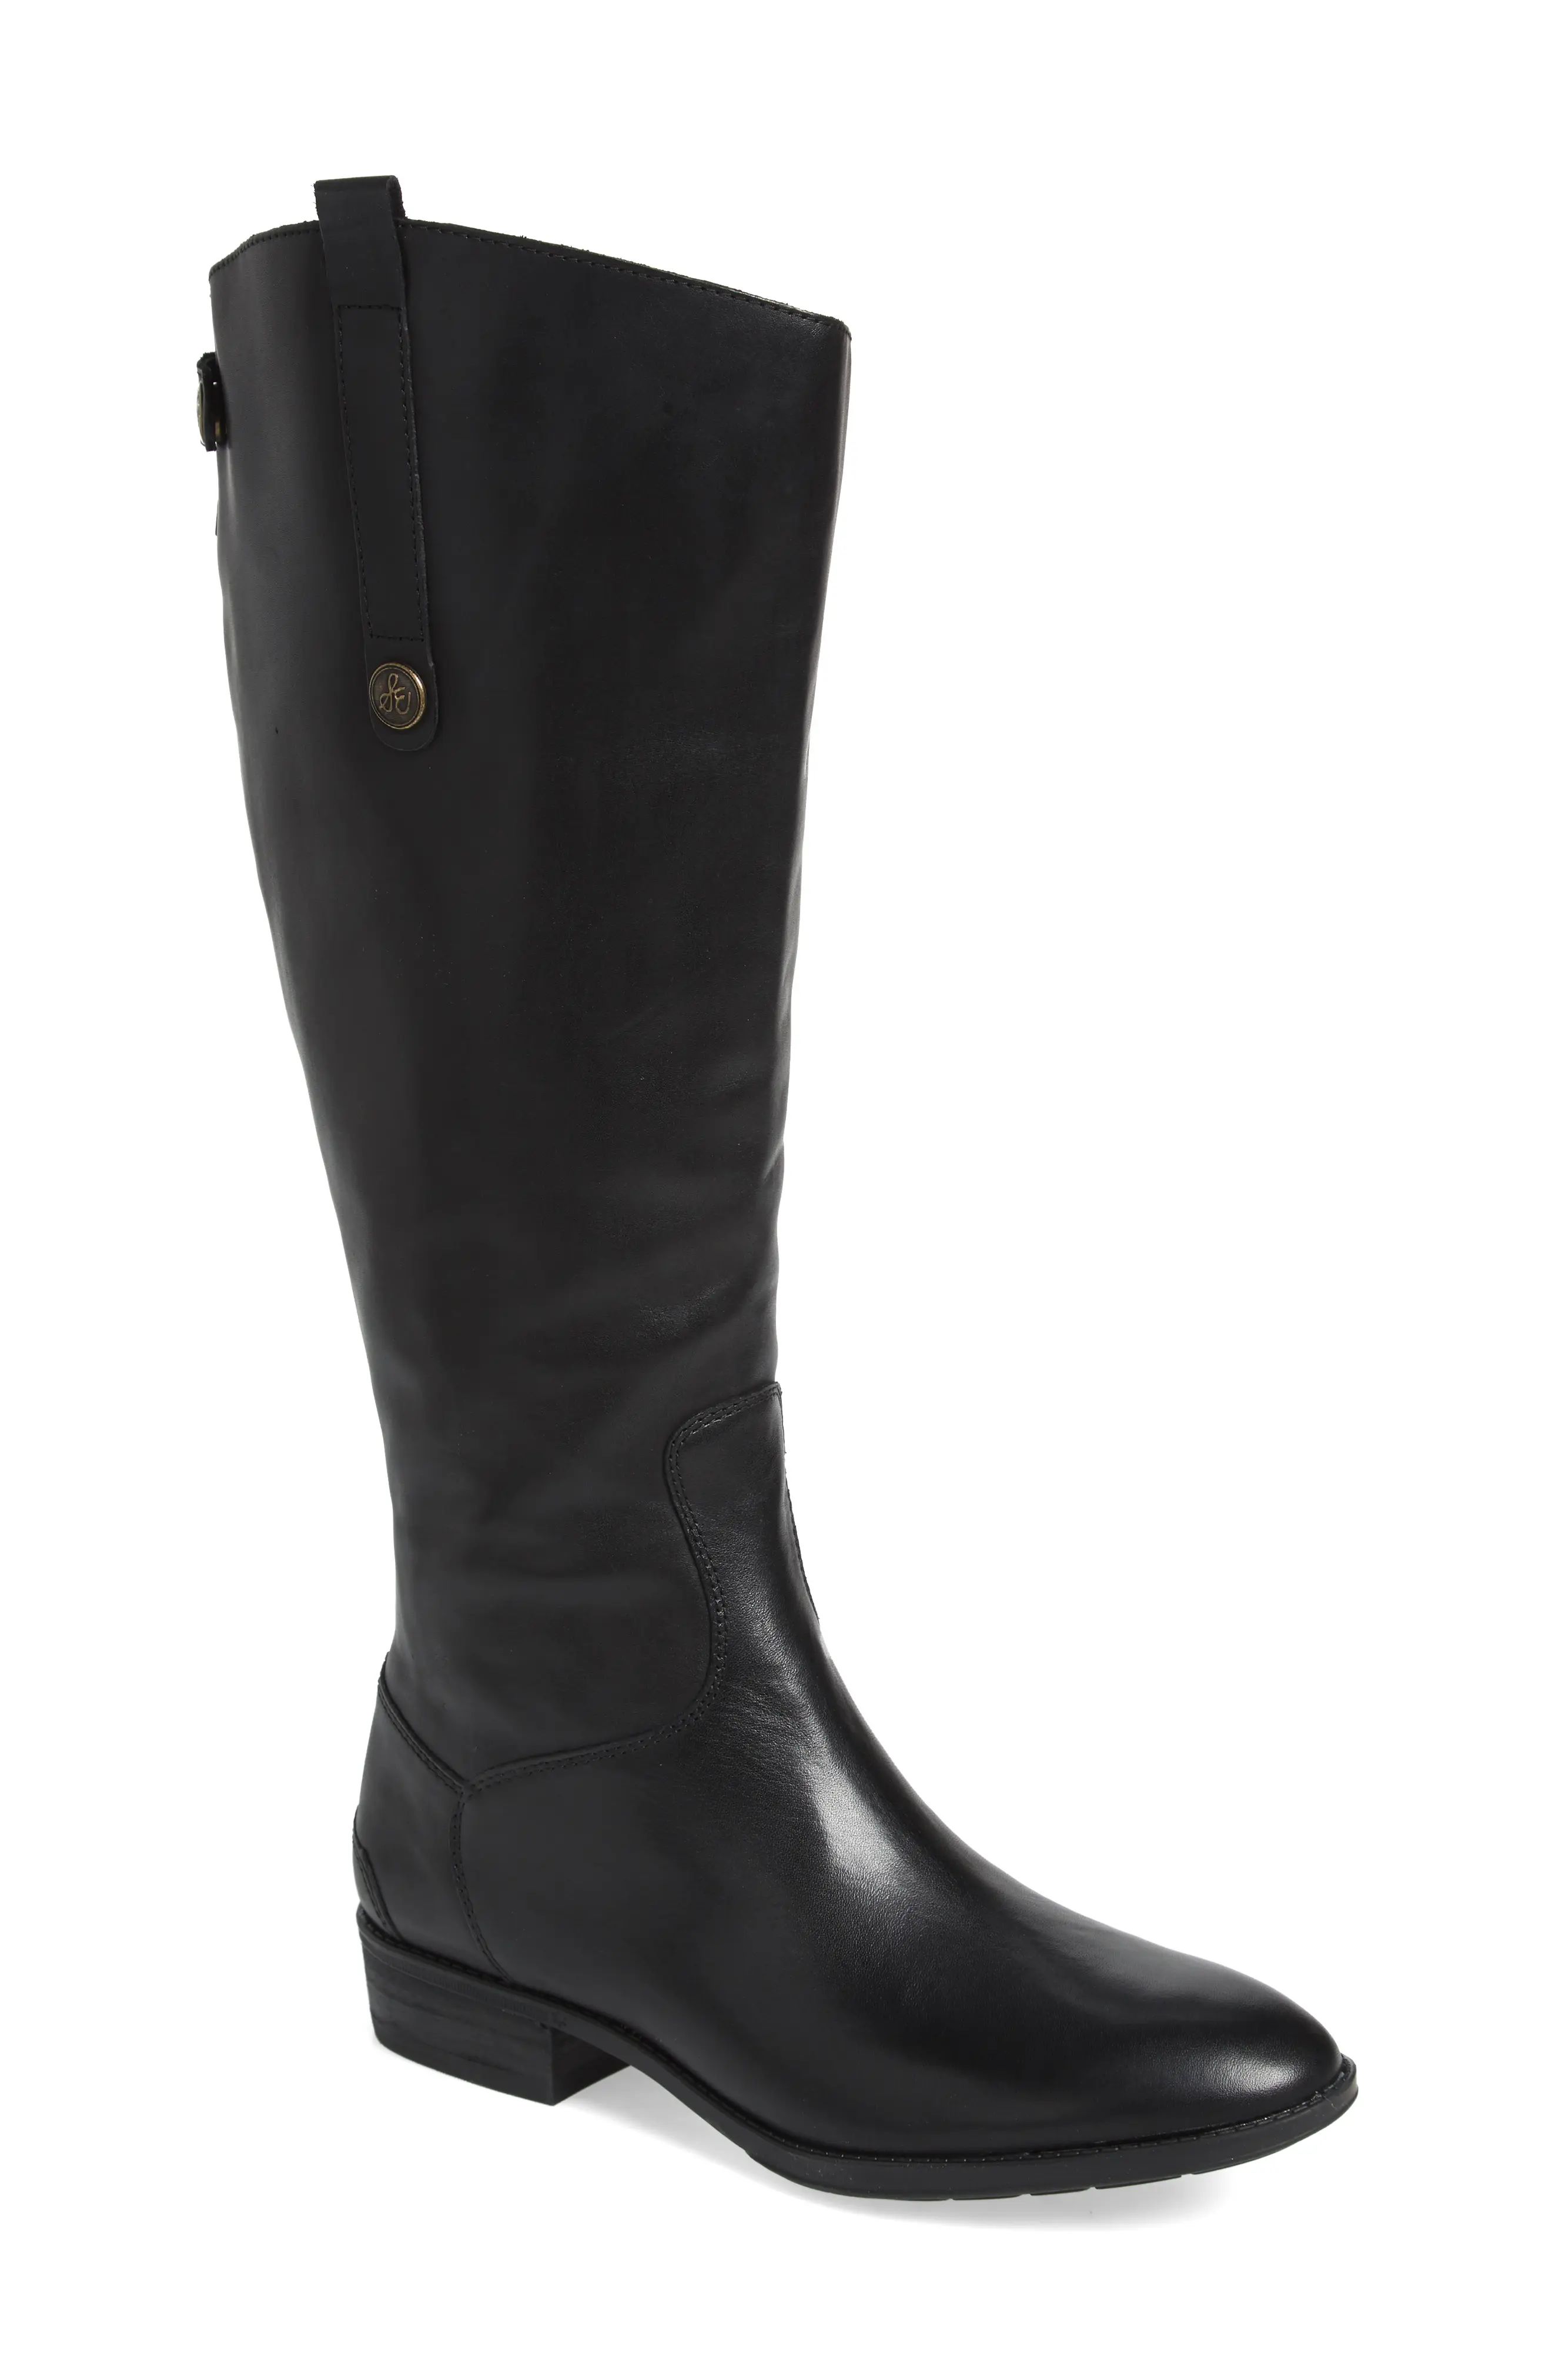 Sam Edelman Penny Boot, Size 6.5 Wide Calf W in Black Wide Calf at Nordstrom | Nordstrom